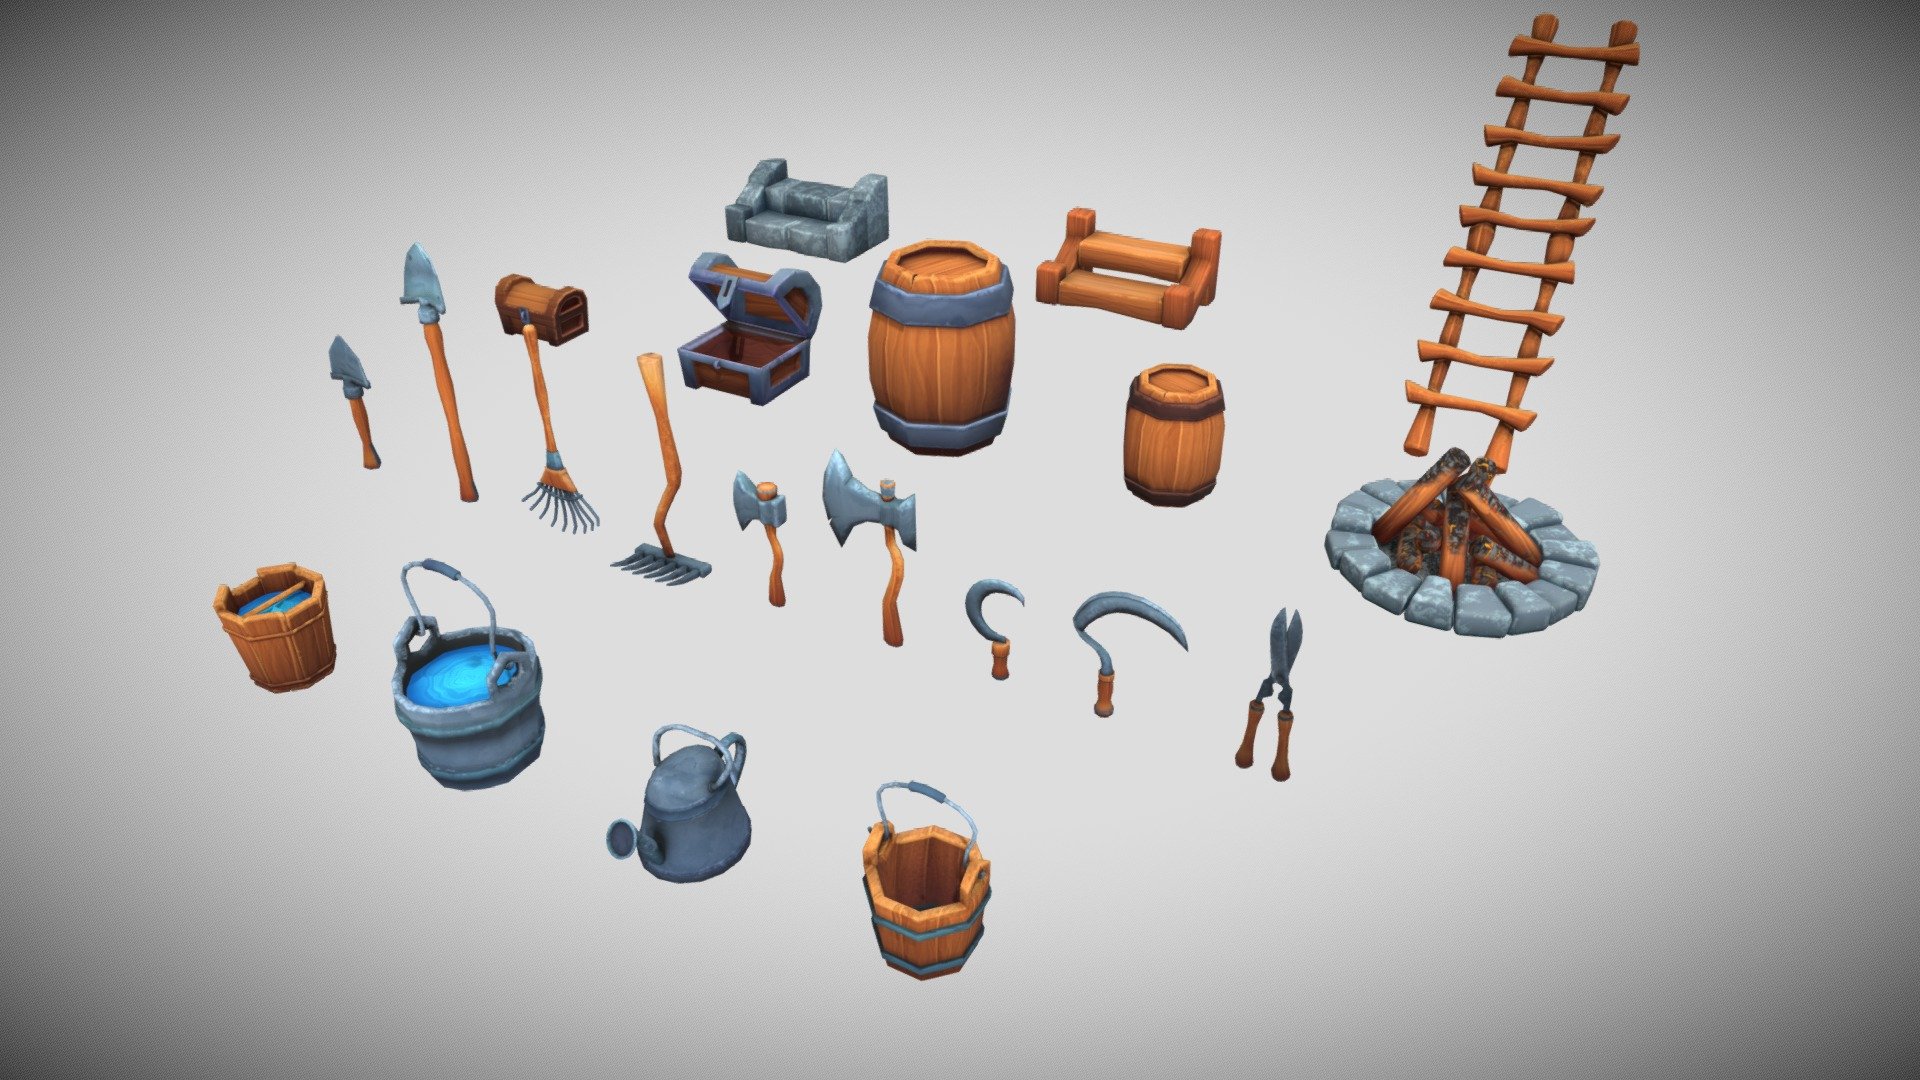 Collection includes 21 lowpoly stylized models with textures, colours &amp; materials. Contains all basic farm equipments.

4 - water bucket variations
2 -barrel variations
9 - essential hand tools
2- storage chest variations
3 - stairs and ladder variations (modular)
1 - fire place
All models contain optmised UV mapping with topology, textures and materials for direct use 3d model